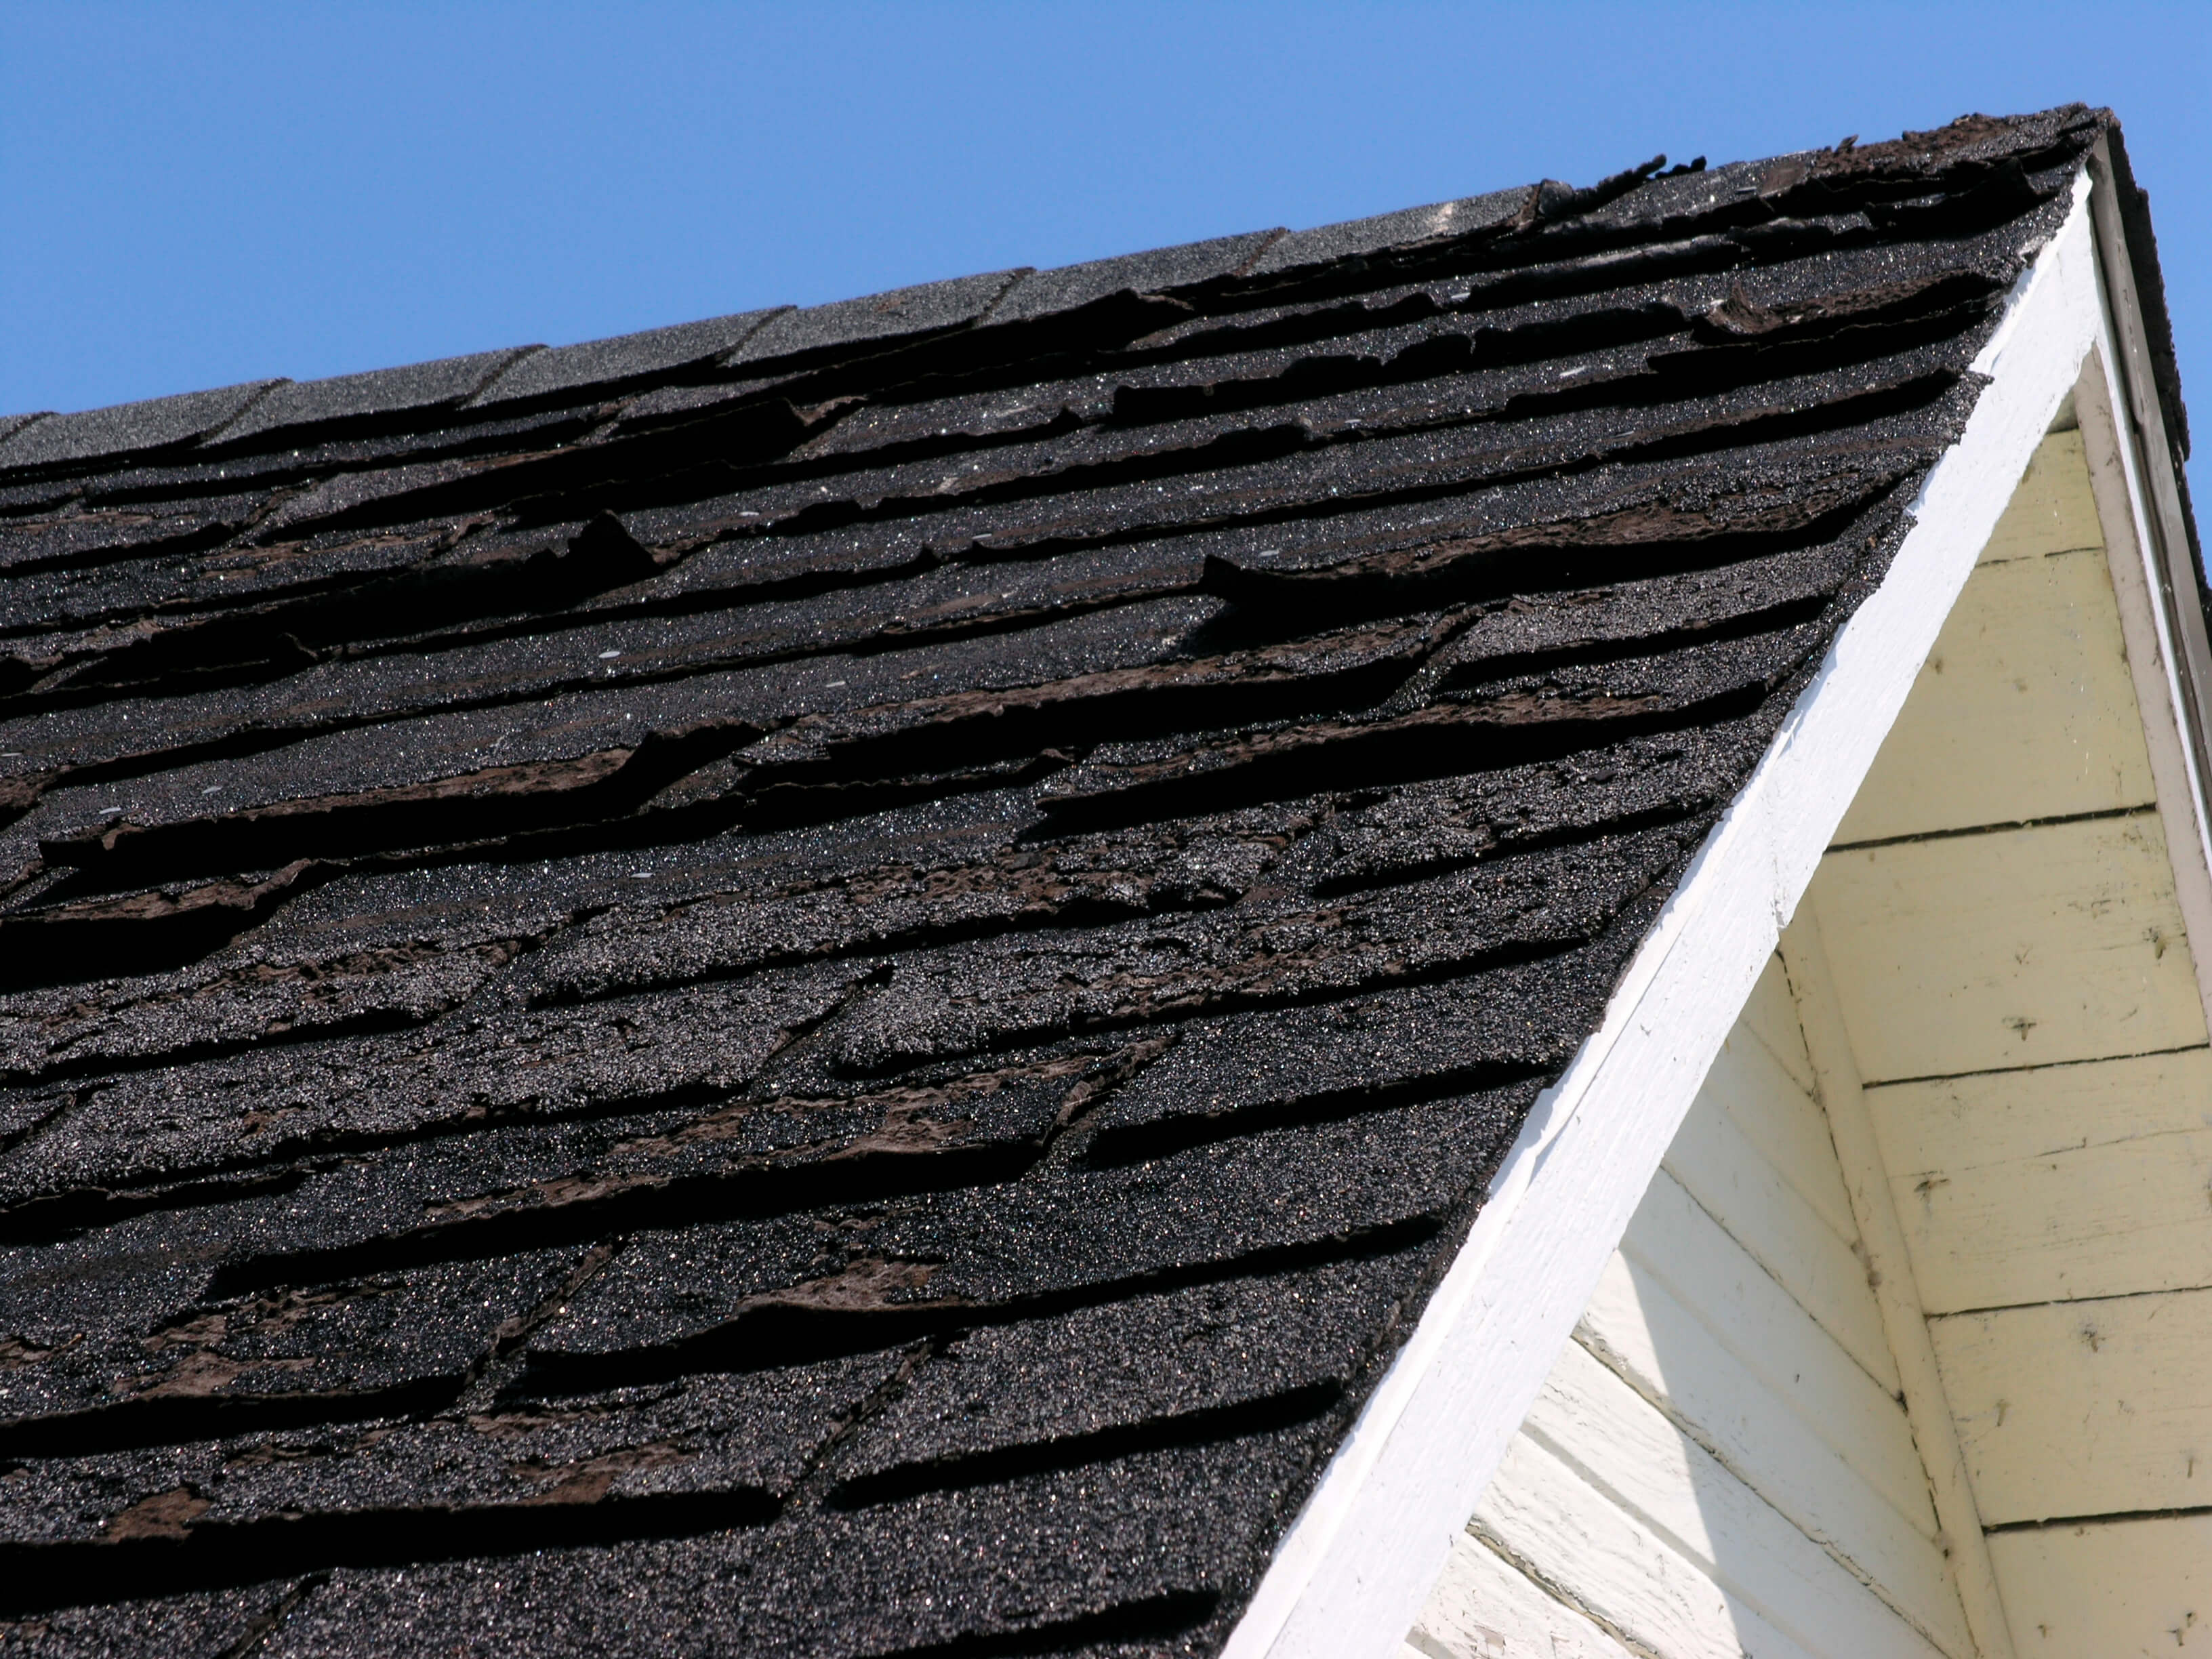 Need a new roof? Call Aces Roofing today!